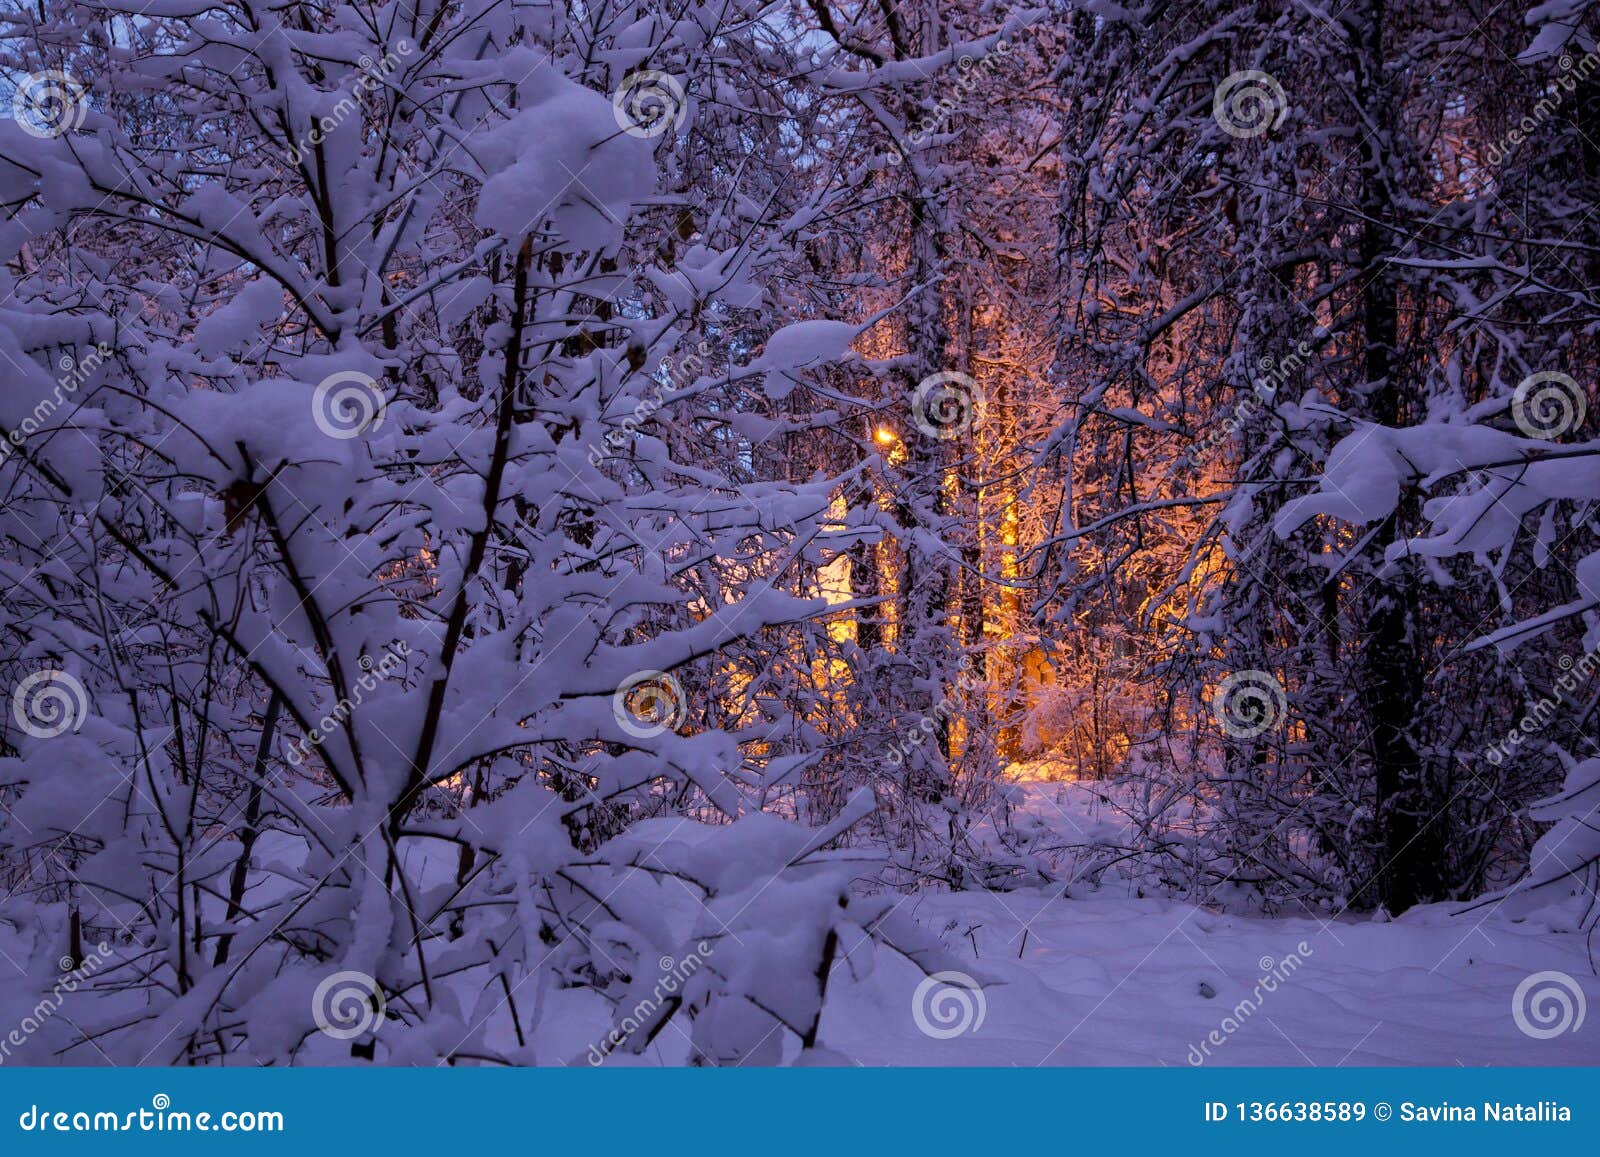 Winter Forest Snow Lighting House Cold Outside Stock Image Image Of Frost Landscape